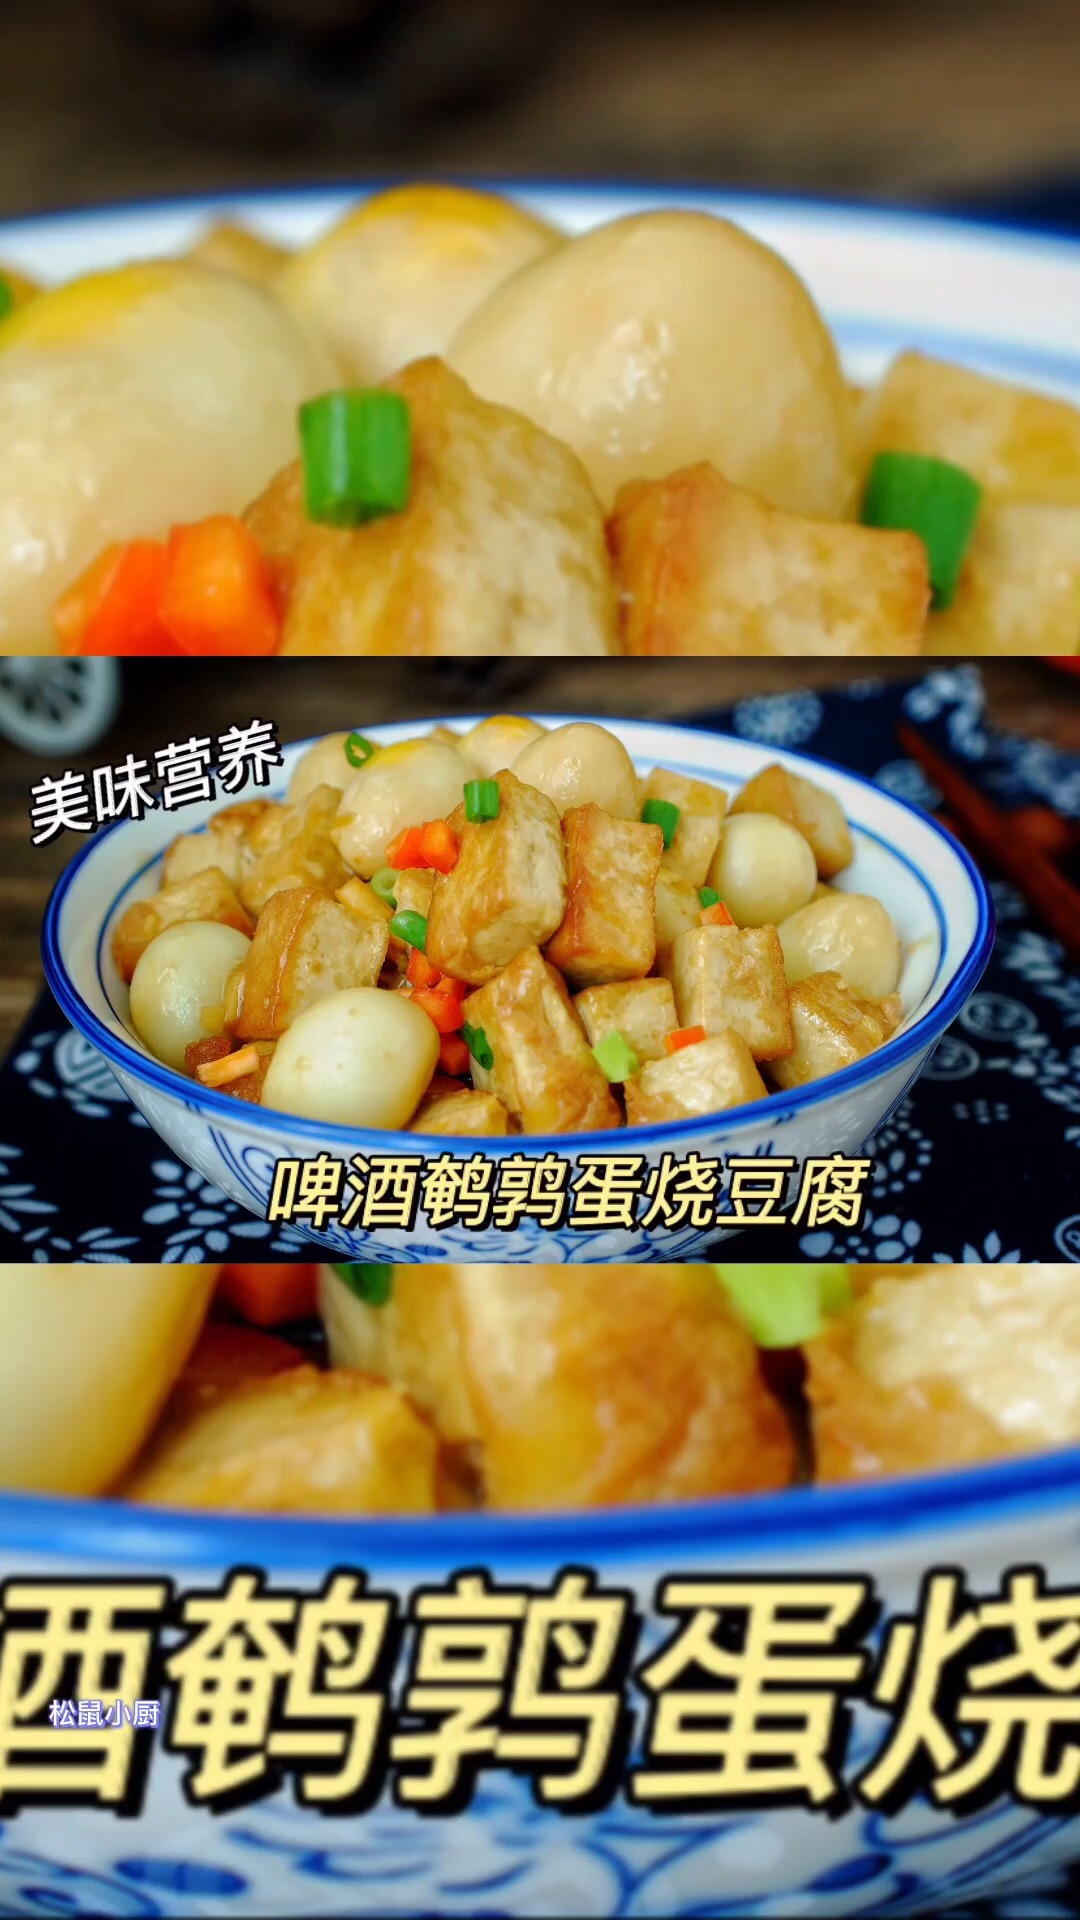 Braised Tofu with Beer and Quail Eggs